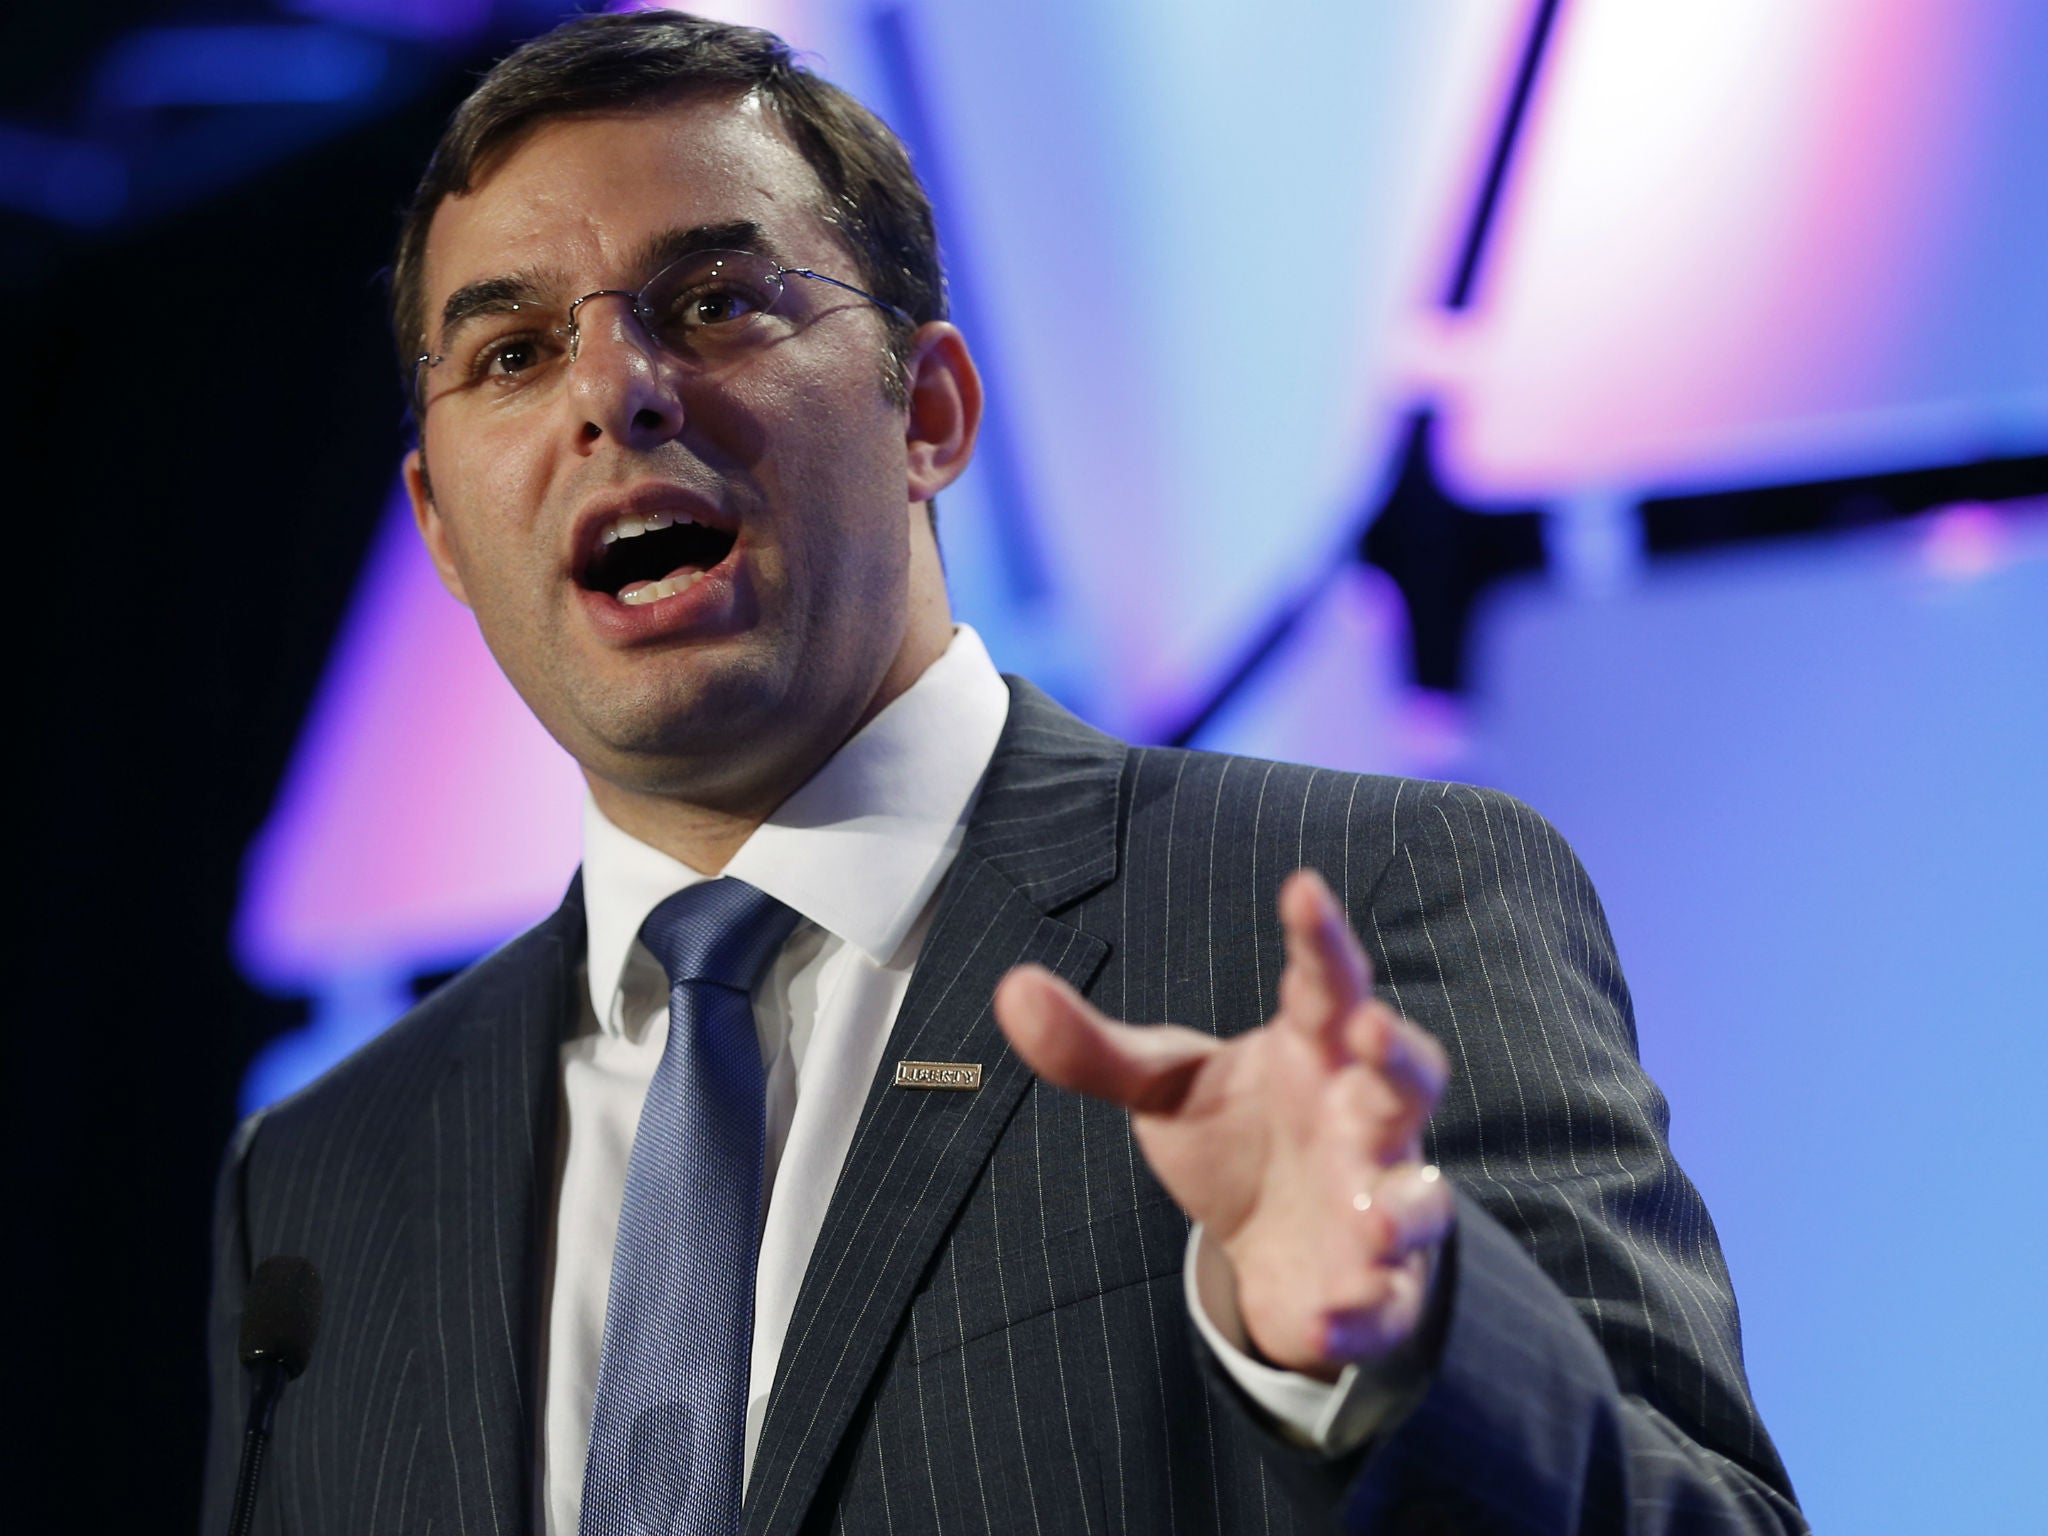 Republican Justin Amash says Trump has done enough to be impeached — but it's the Democrats who will suffer